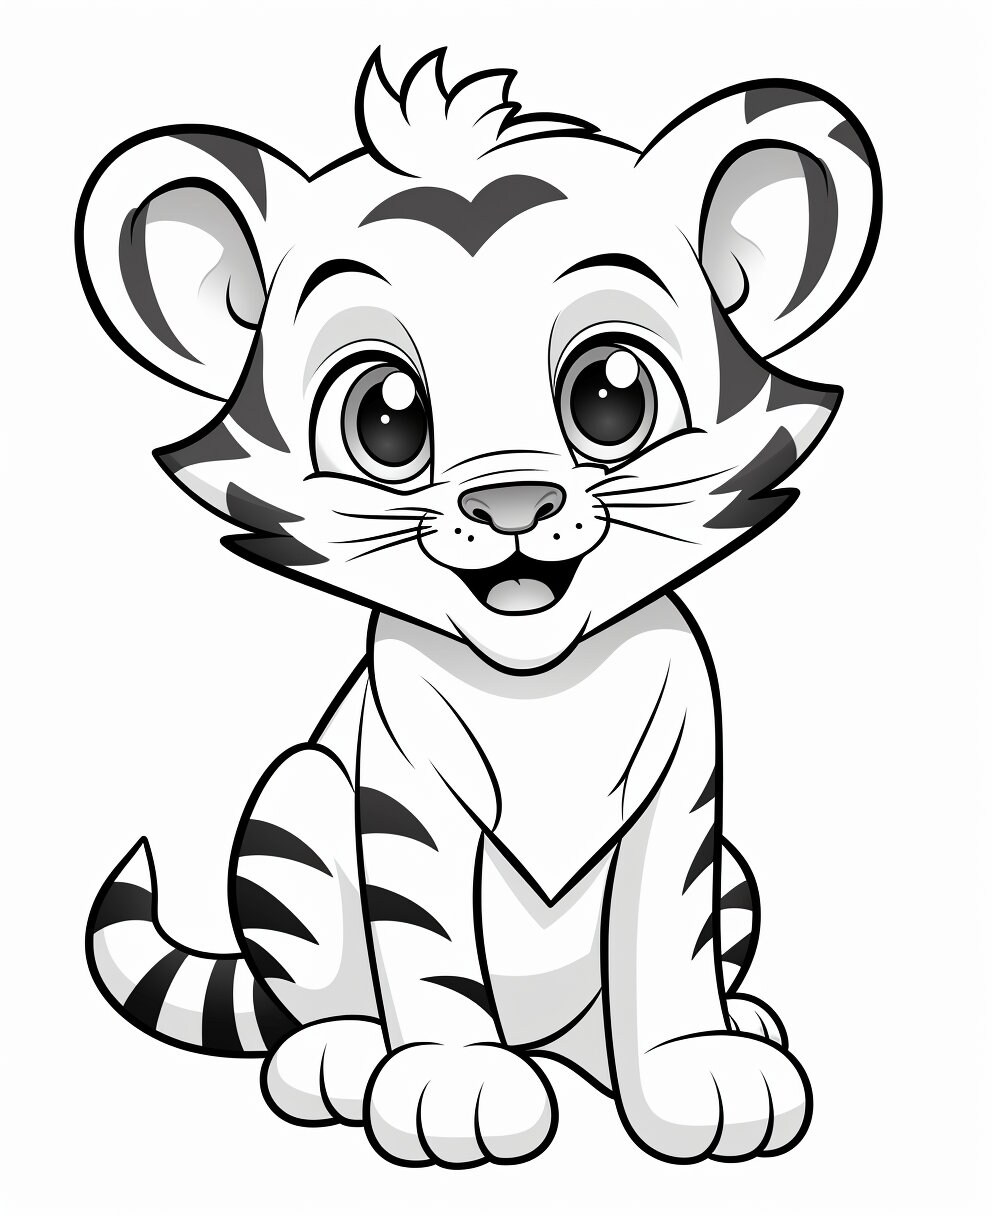 100 Baby and Adult Animals Coloring Page Book Adults Kids - Etsy